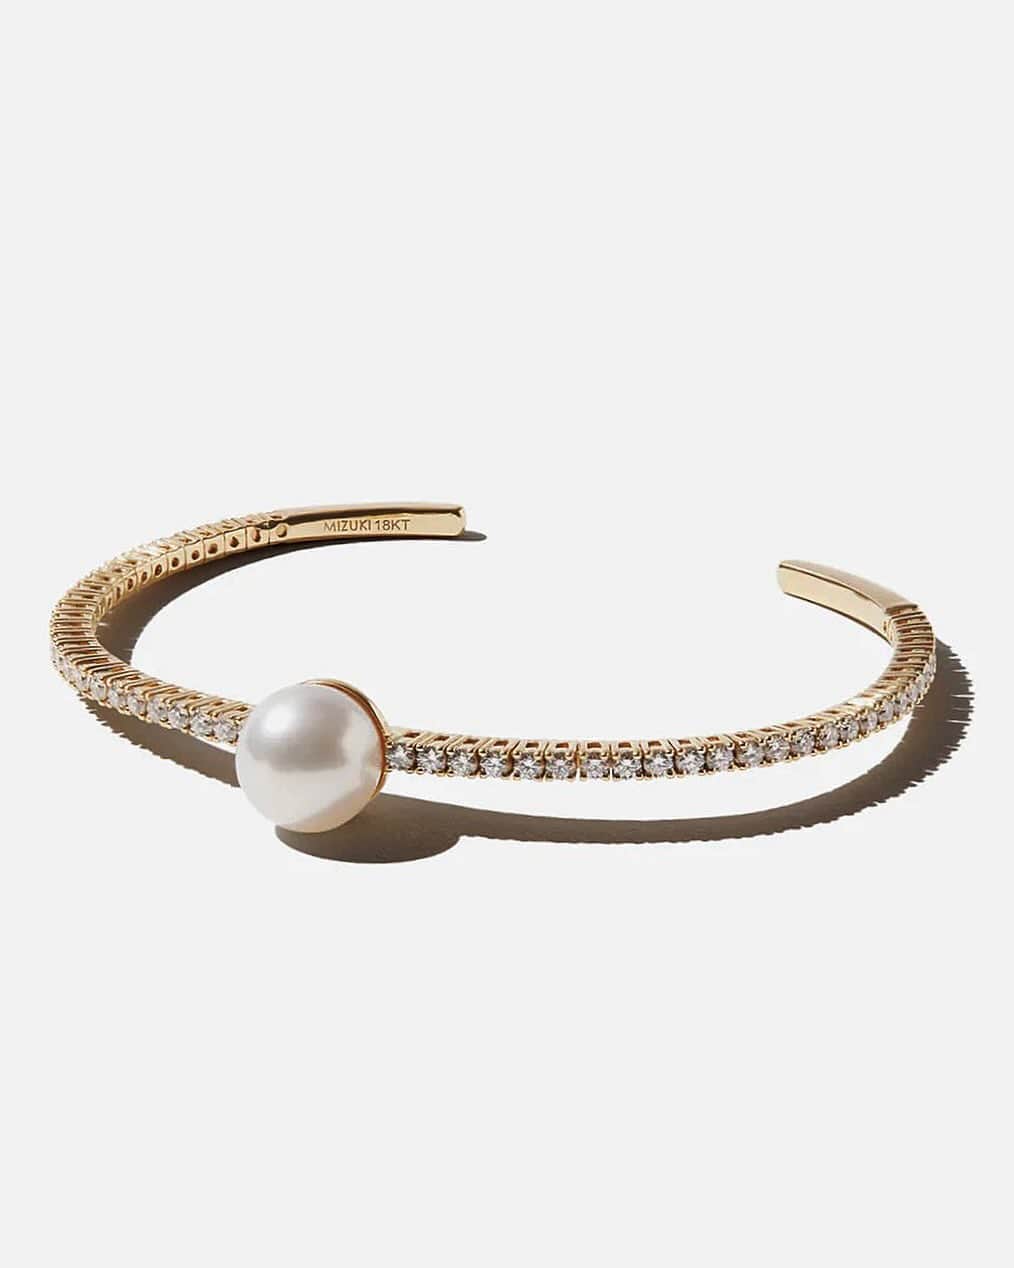 M I Z U K Iのインスタグラム：「‘Tis the Season to adorn in style   The latest addition, Prive cuff with diamonds and South Sea pearl✨  #mizuki #mizukijewels #mizukijewelry #prive #modern #pearl #diamond #cuff #tistheseason」